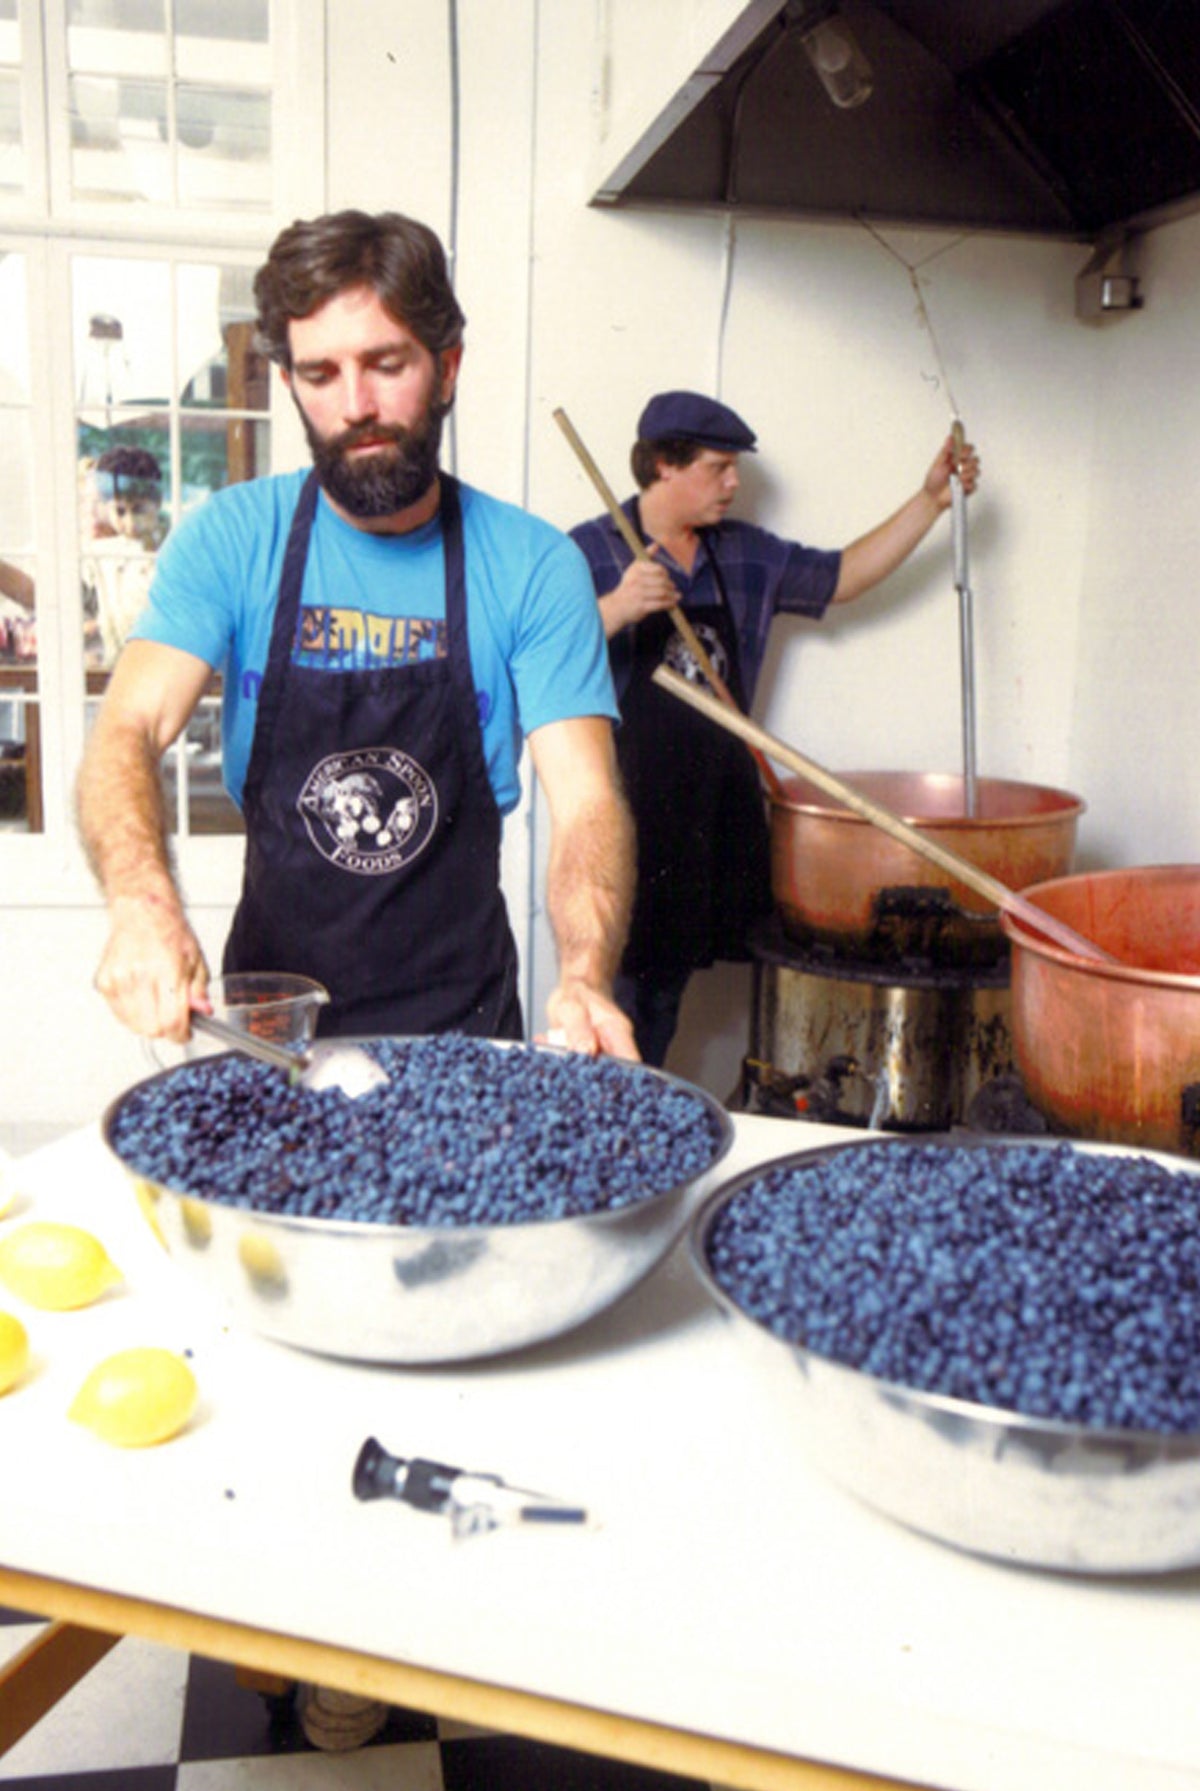 Original photos of American Spoon cooks with fresh blueberries